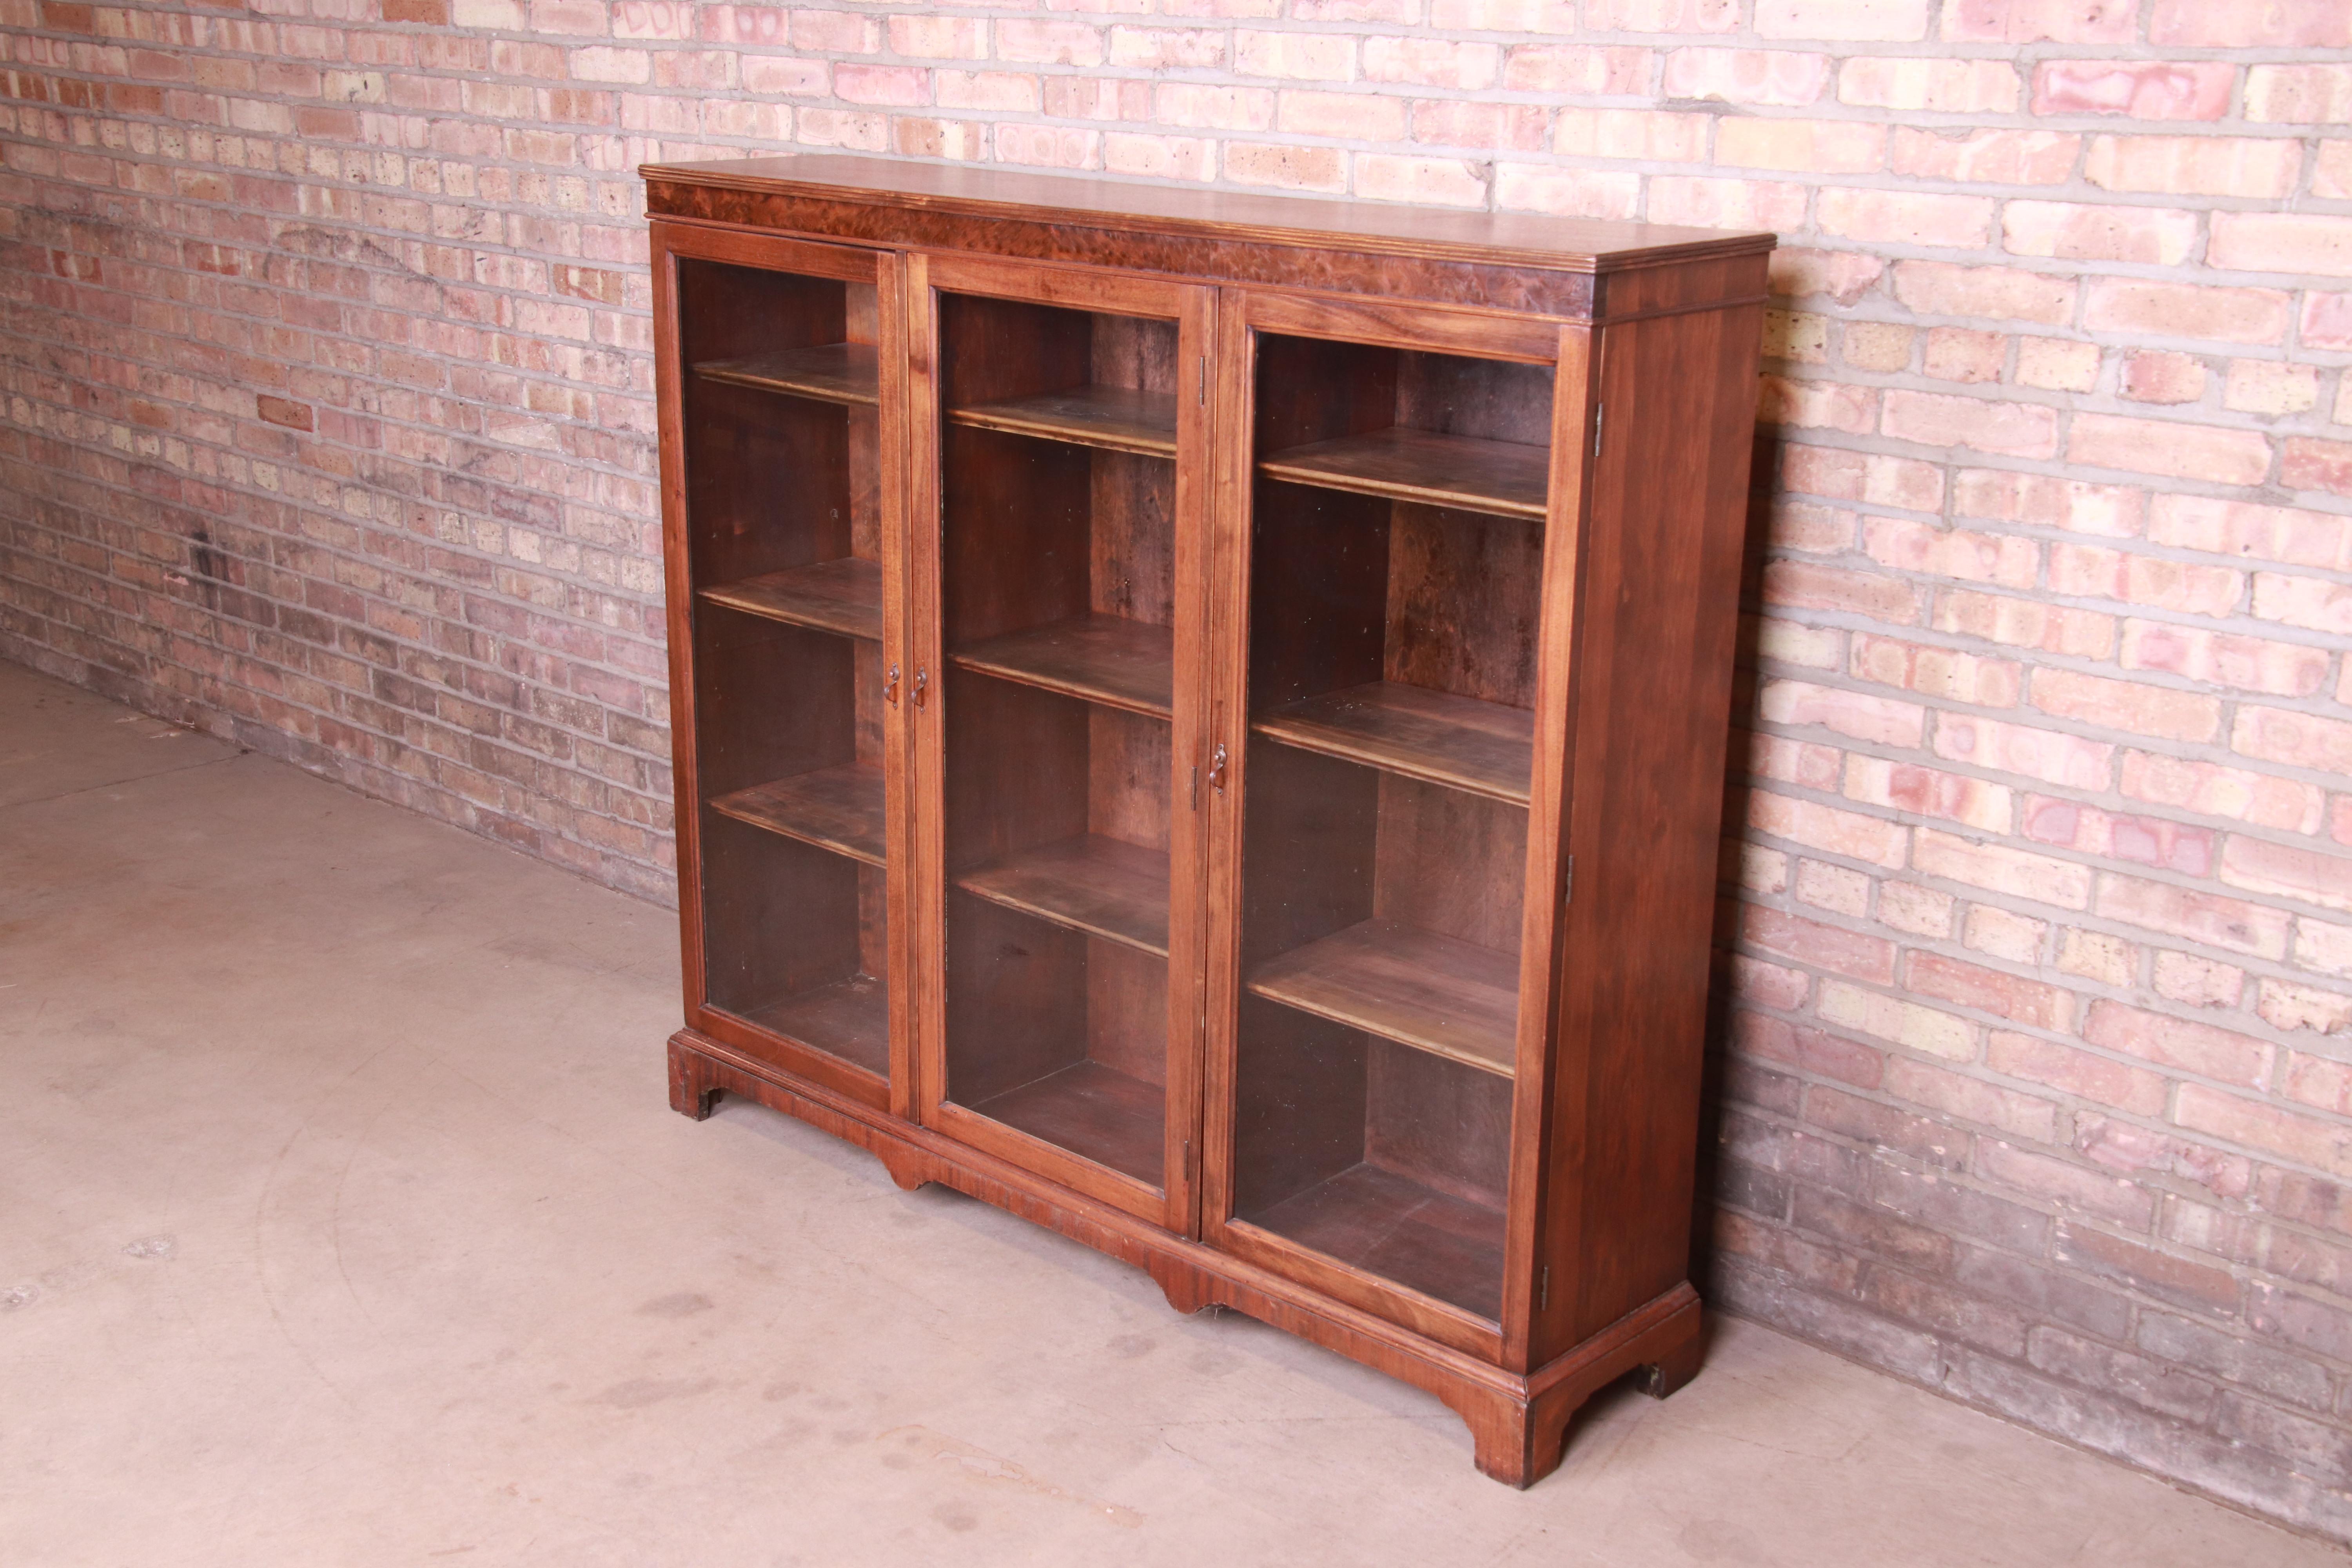 American Antique Arts & Crafts Mahogany and Burled Walnut Glass Front Triple Bookcase